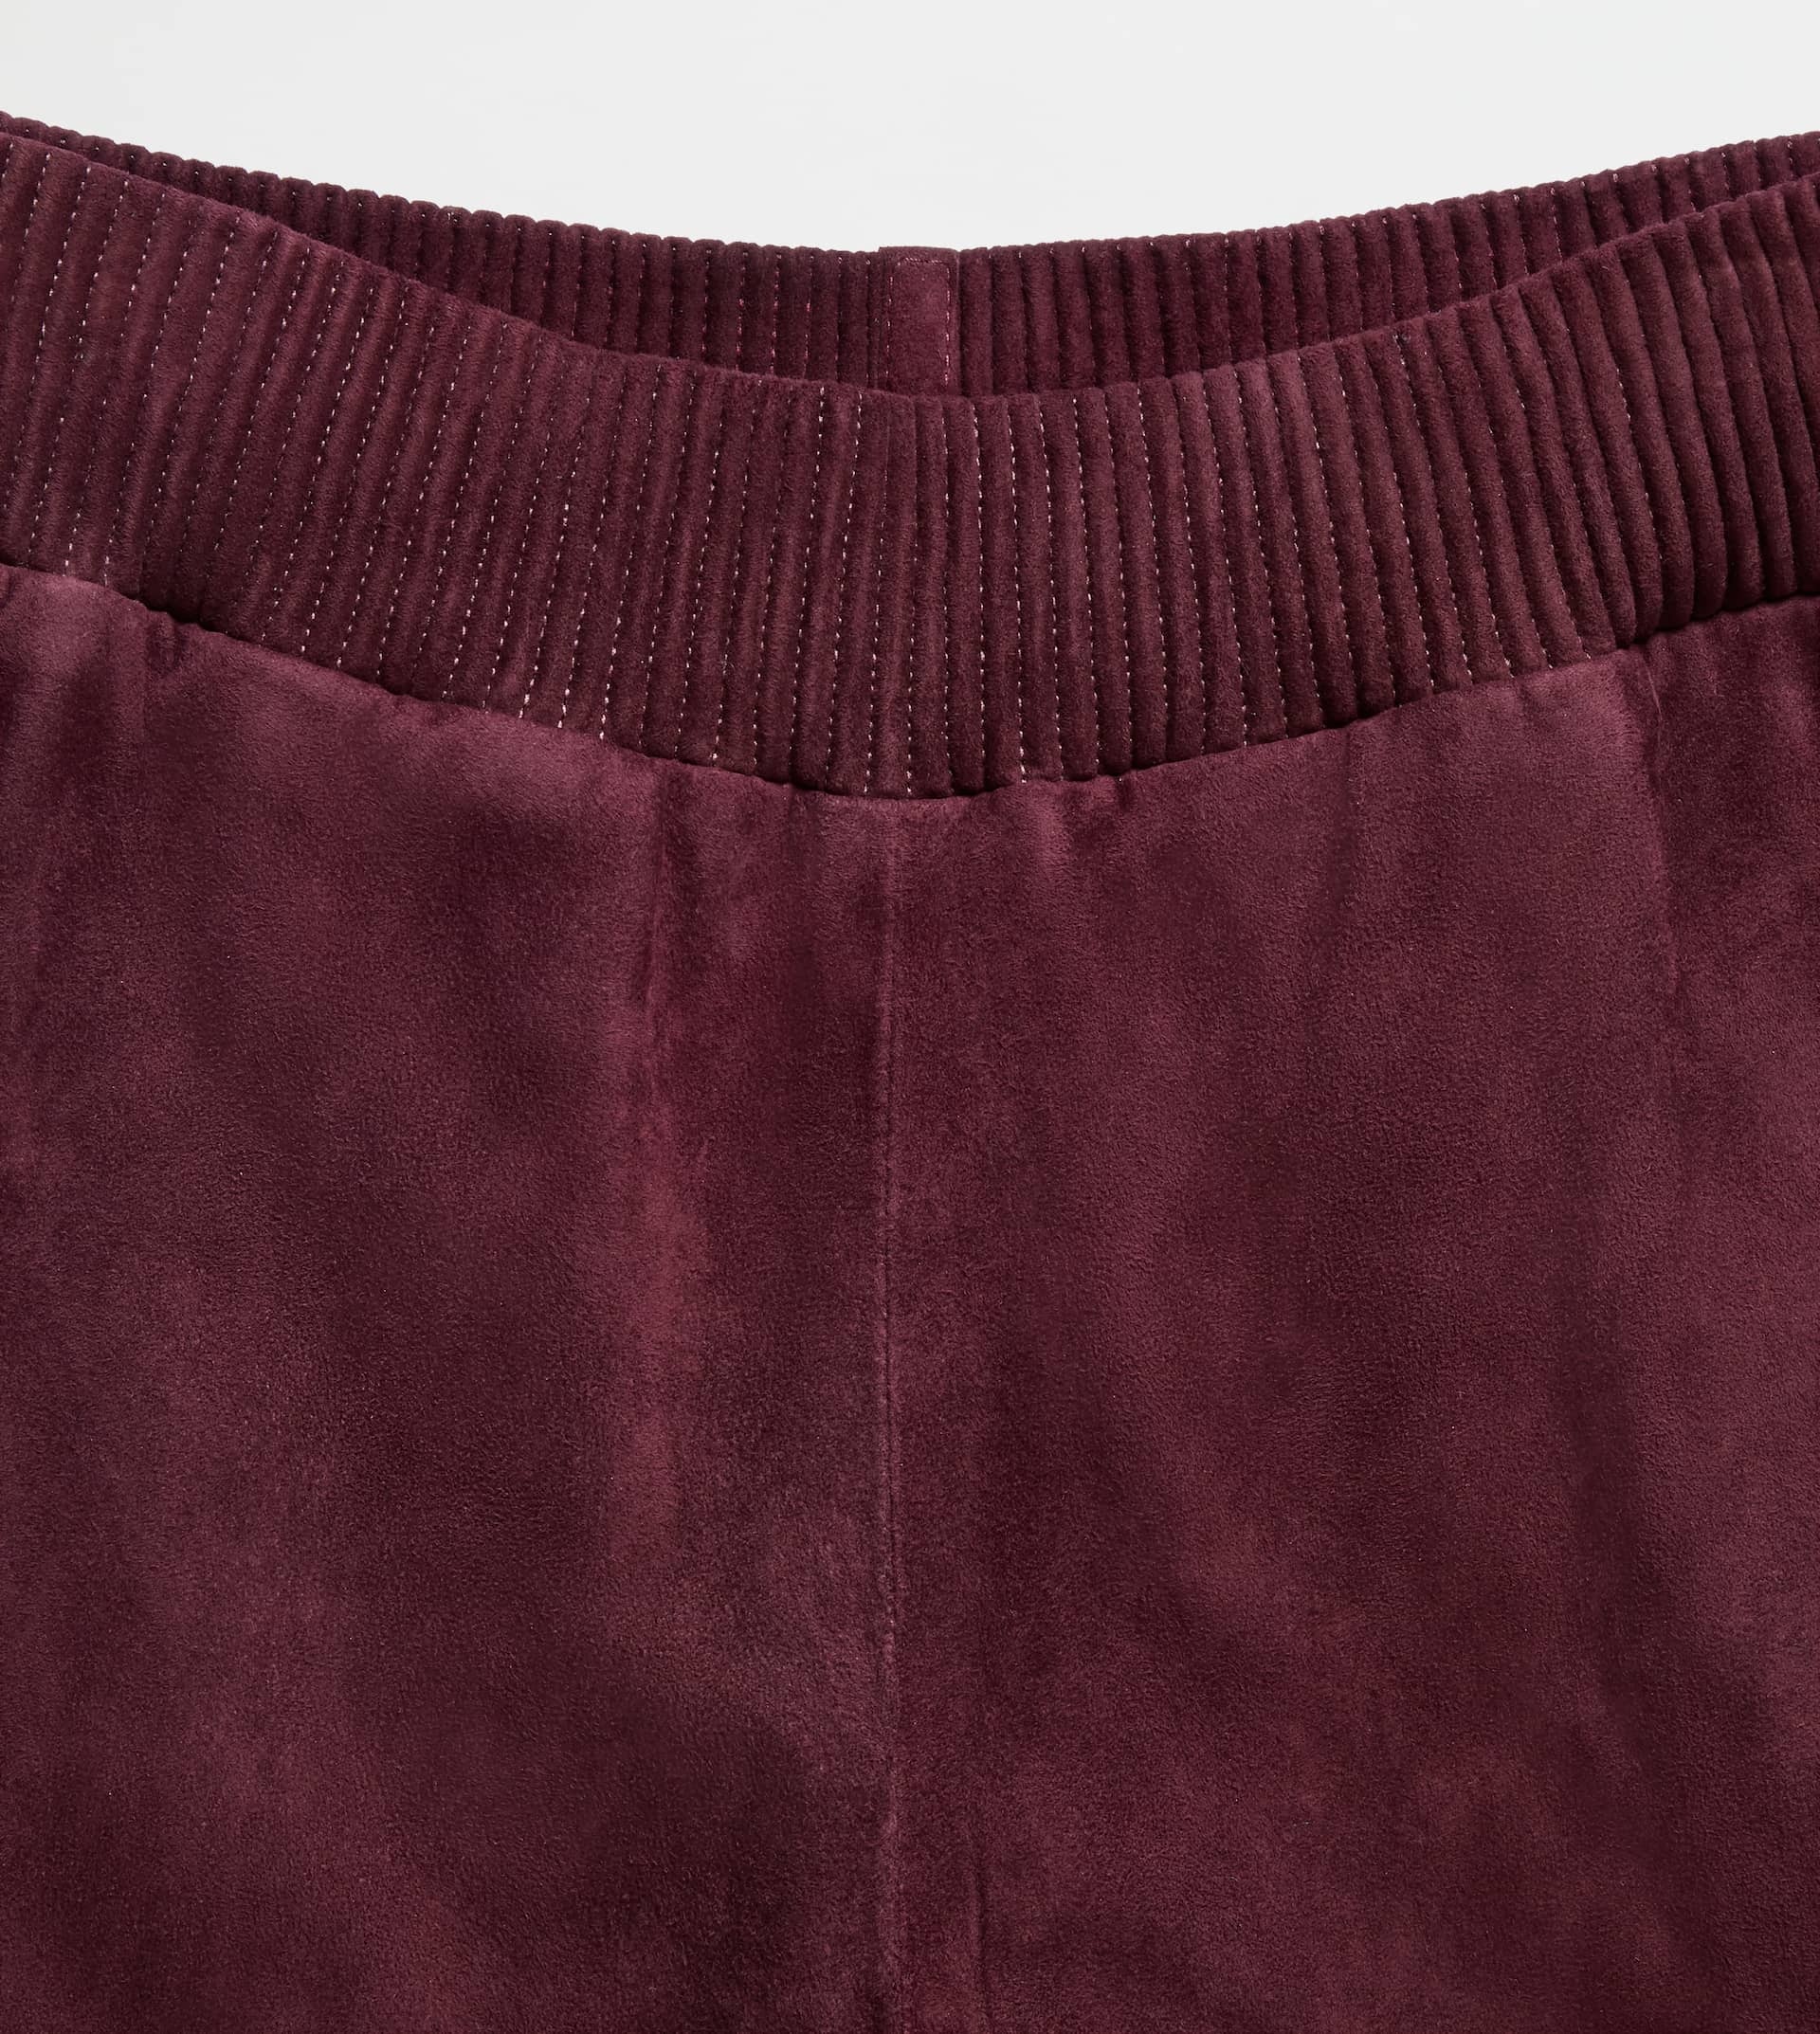 TRACKSUIT TROUSERS IN SUEDE - BURGUNDY - 2